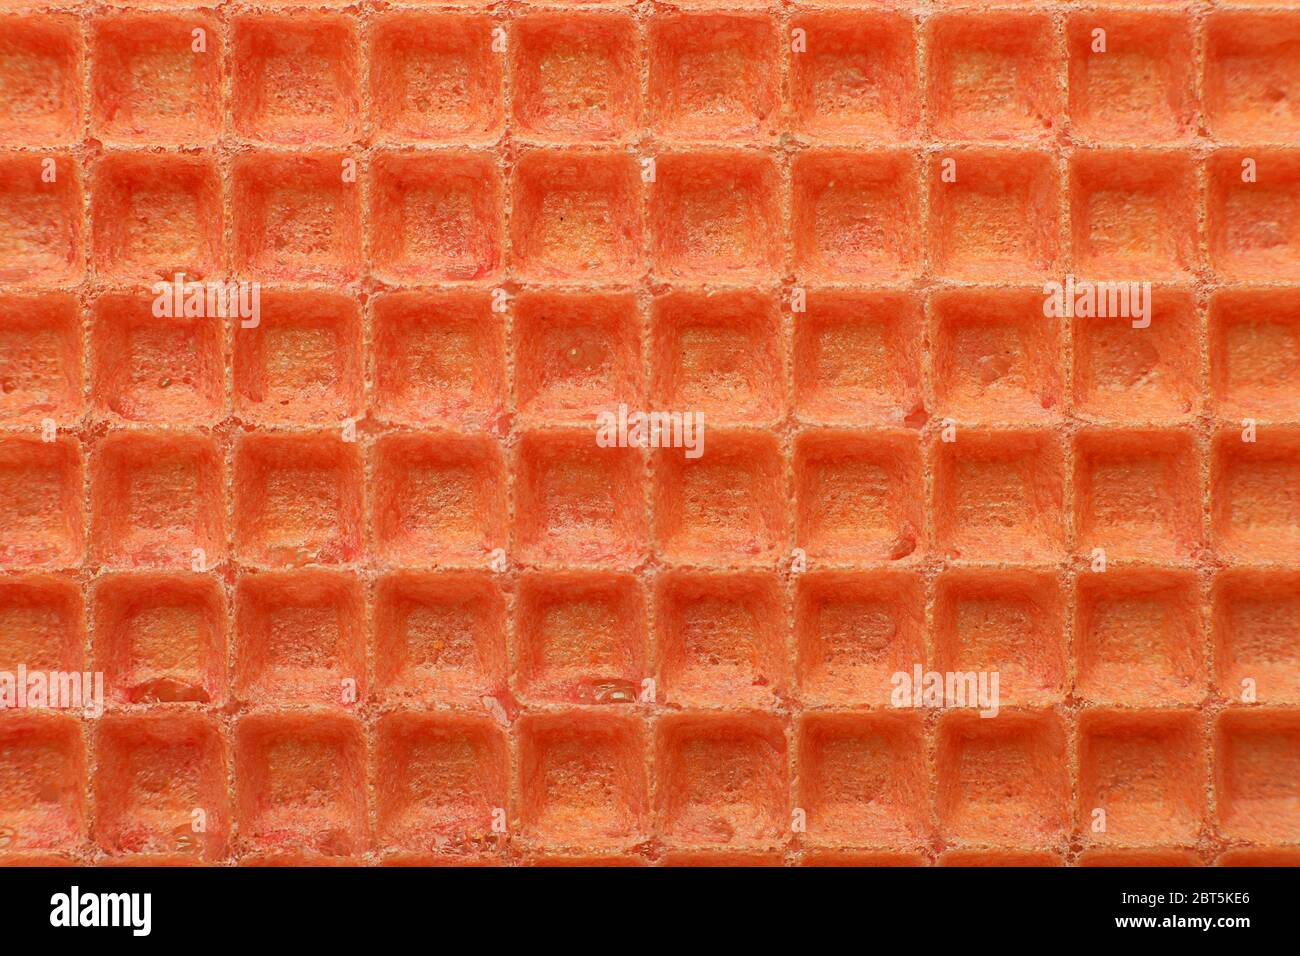 Red waffles surface closeup detail background Stock Photo